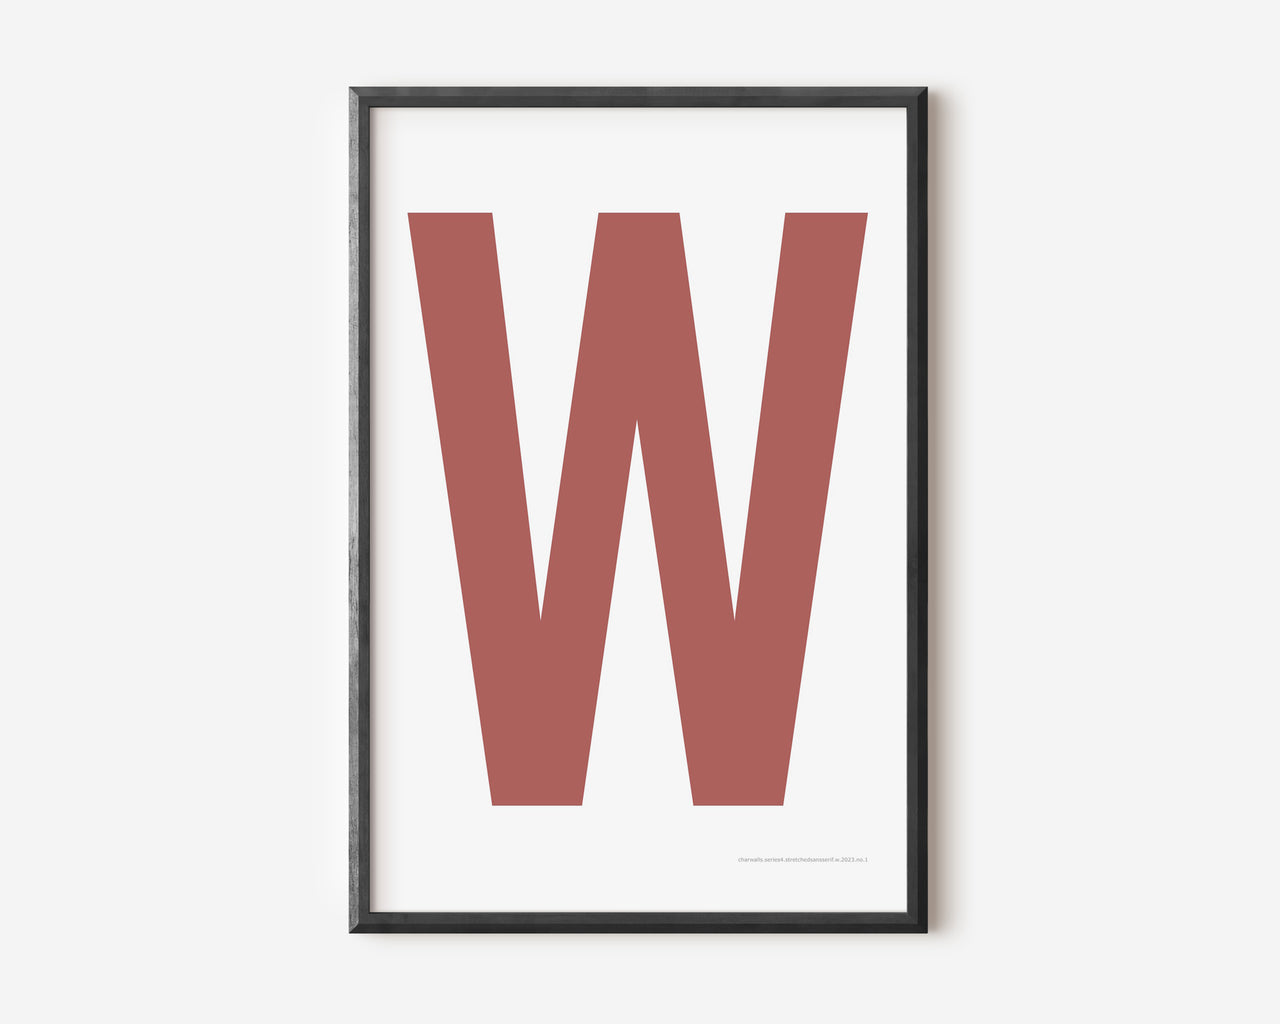 Modern art print with an uppercase Nantucket red letter W on a white background.